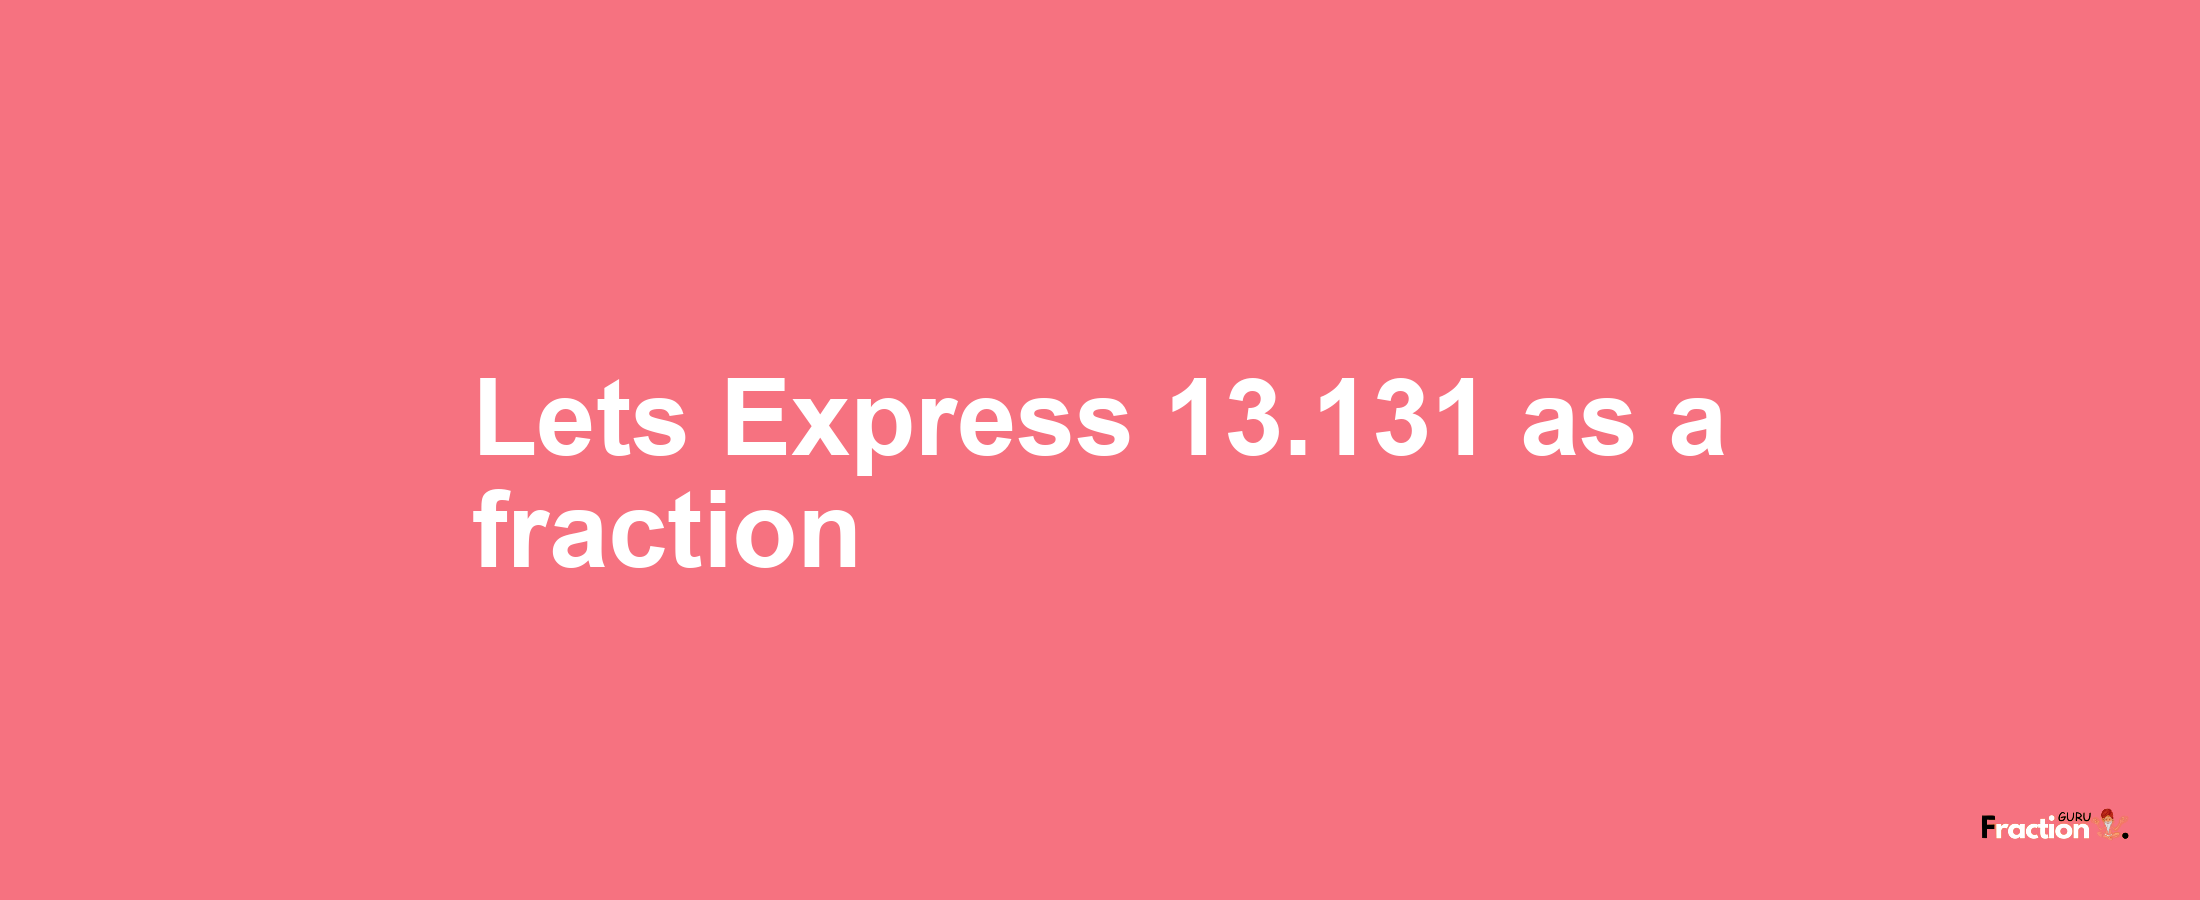 Lets Express 13.131 as afraction